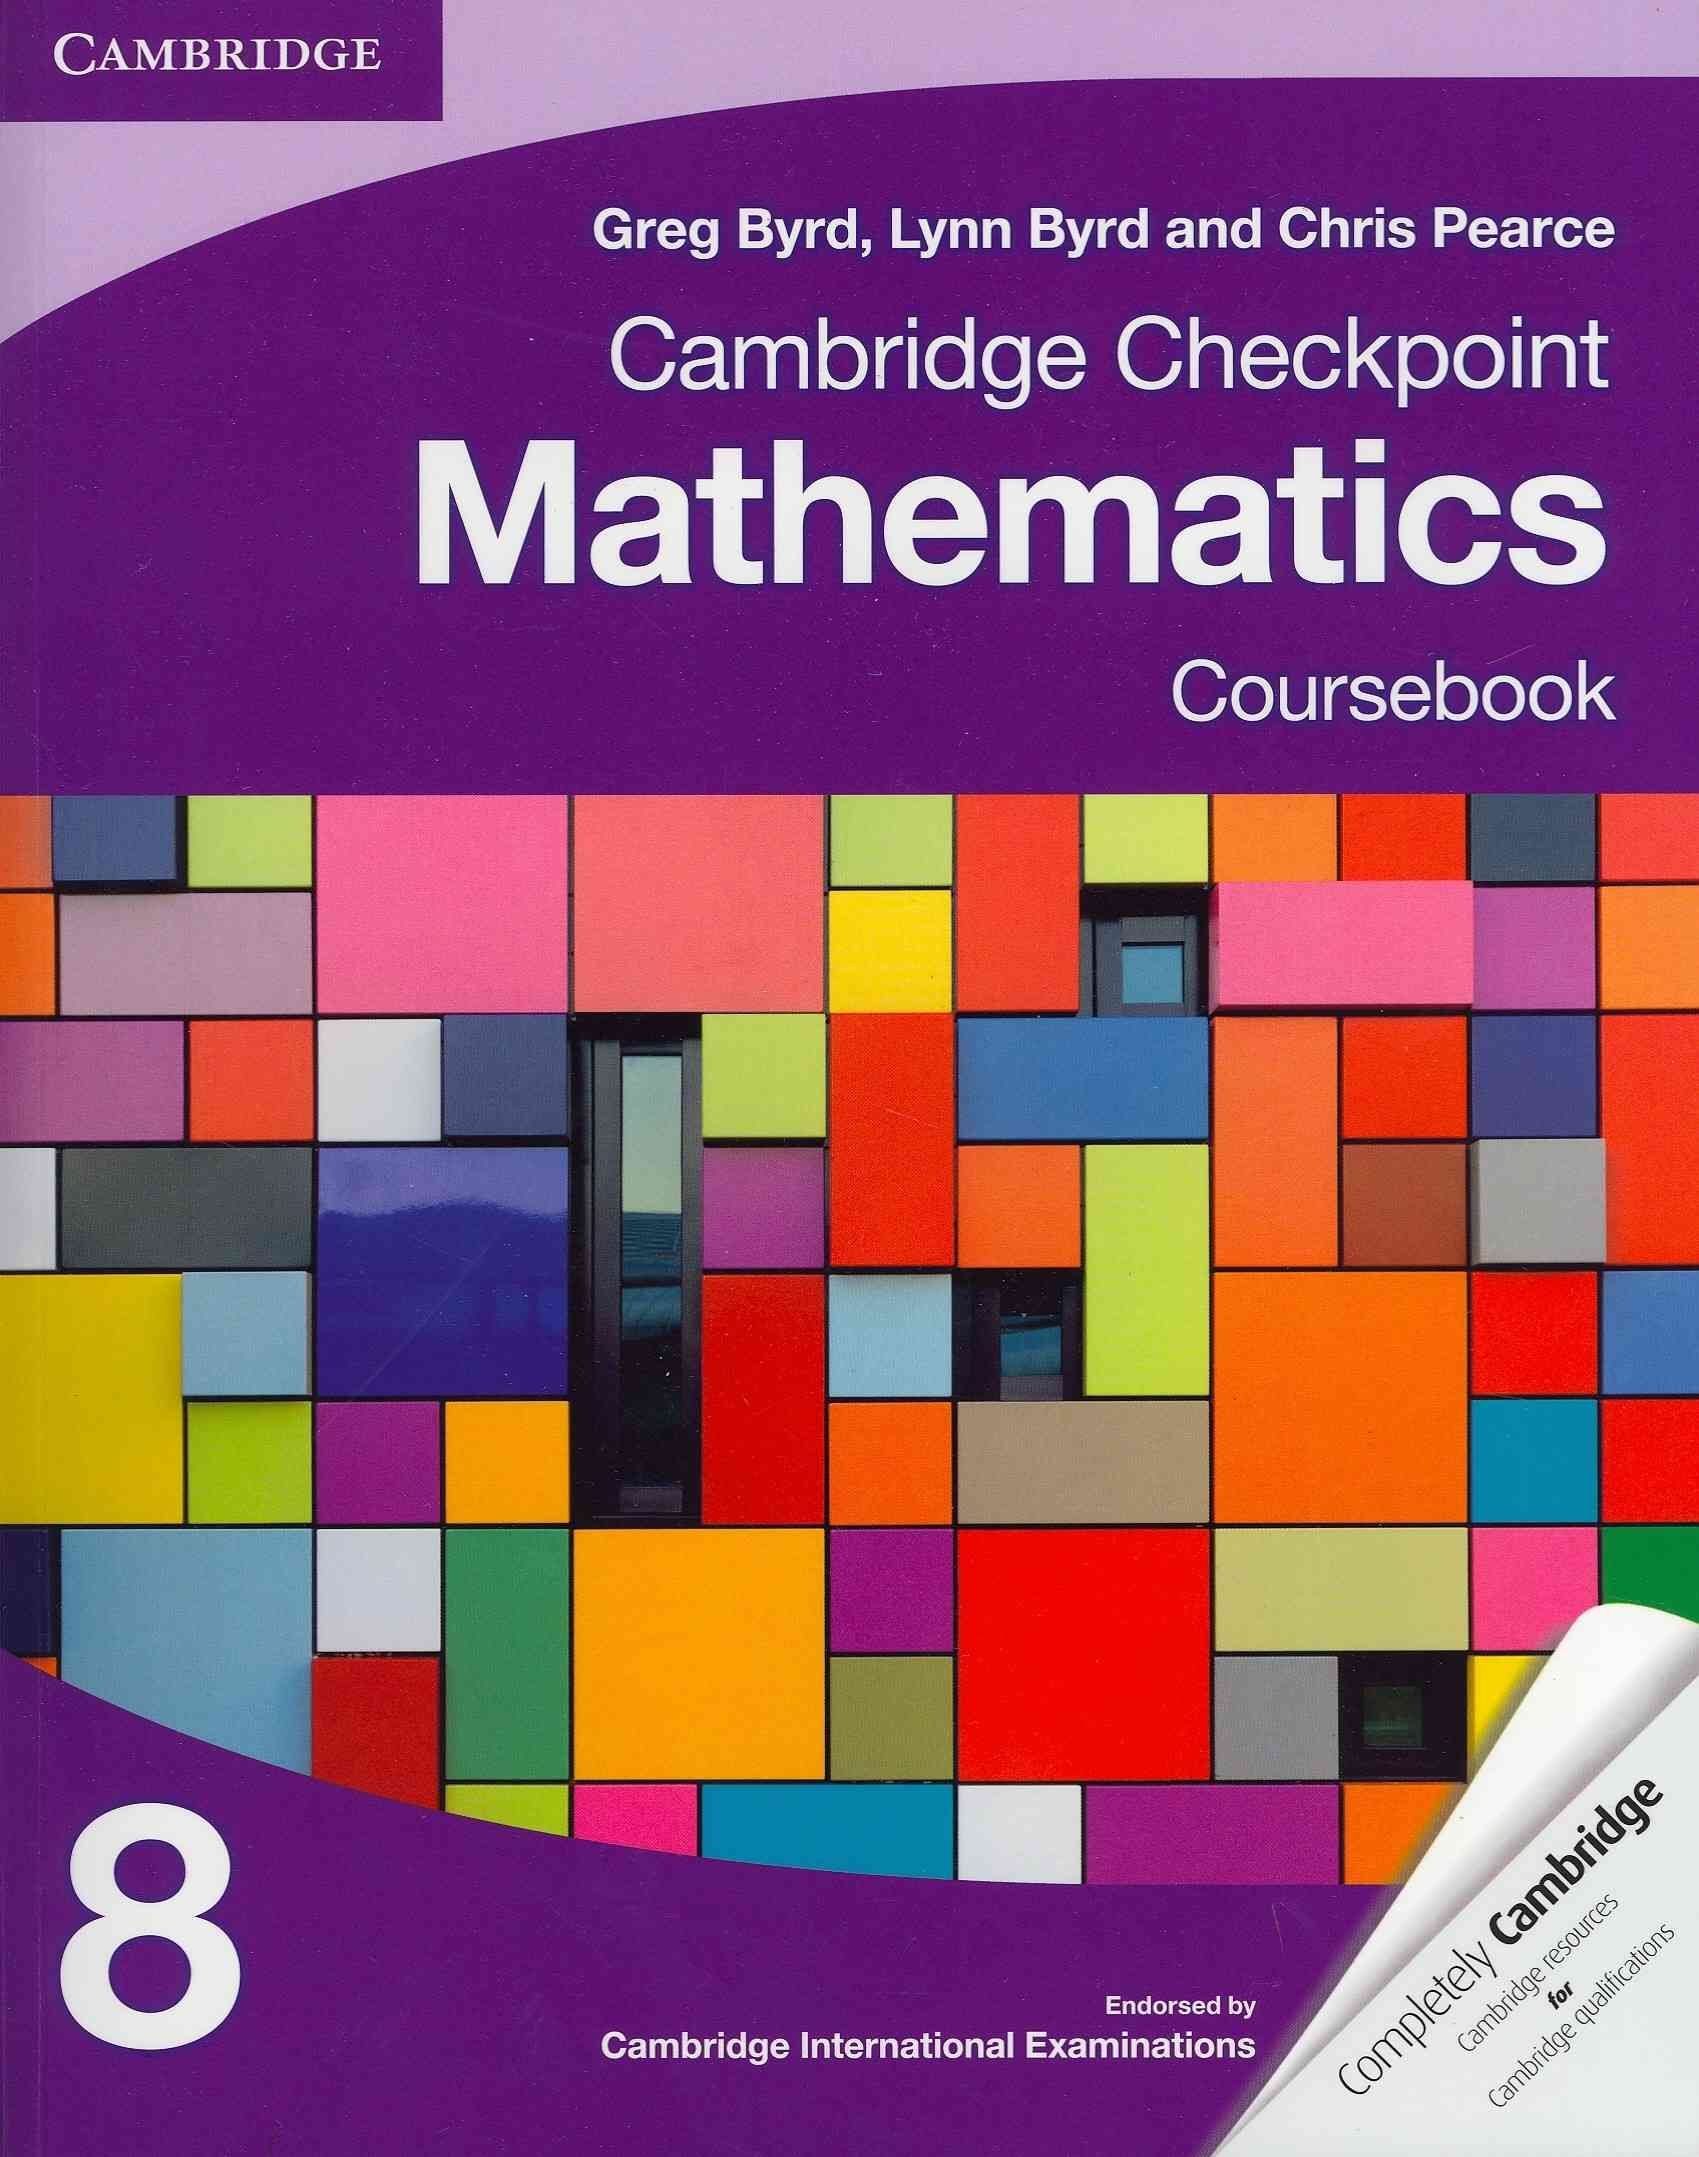 Buy Cambridge Checkpoint Mathematics Coursebook 8 by Greg Byrd 